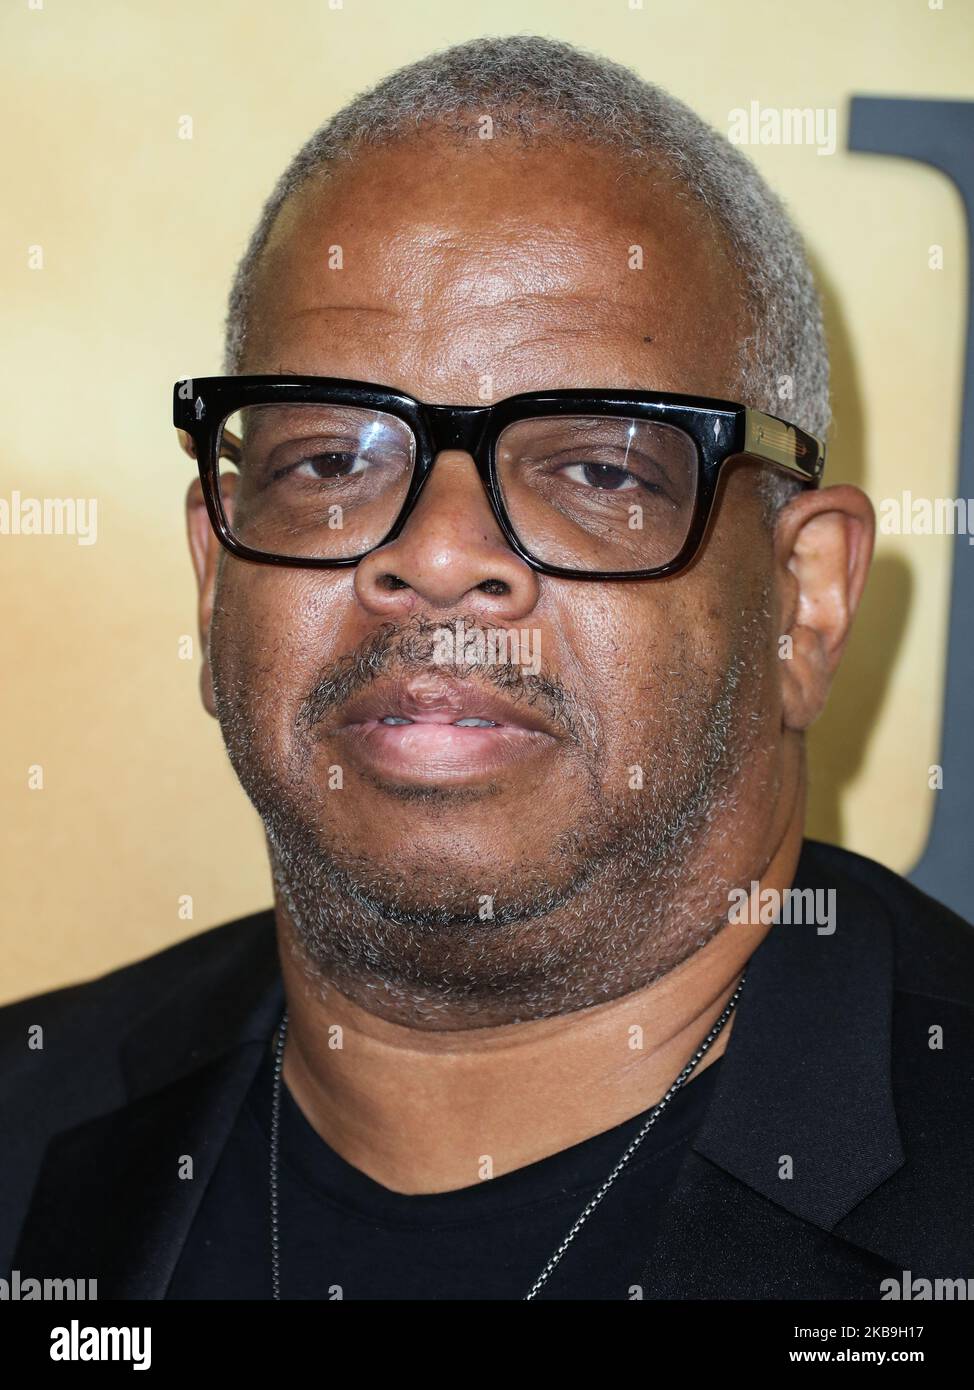 LOS ANGELES, CALIFORNIA, USA - OCTOBER 29: Terence Blanchard arrives at the Los Angeles Premiere Of Focus Features' 'Harriet' held at The Orpheum Theatre on October 29, 2019 in Los Angeles, California, United States. (Photo by Xavier Collin/Image Press Agency/NurPhoto) Stock Photo